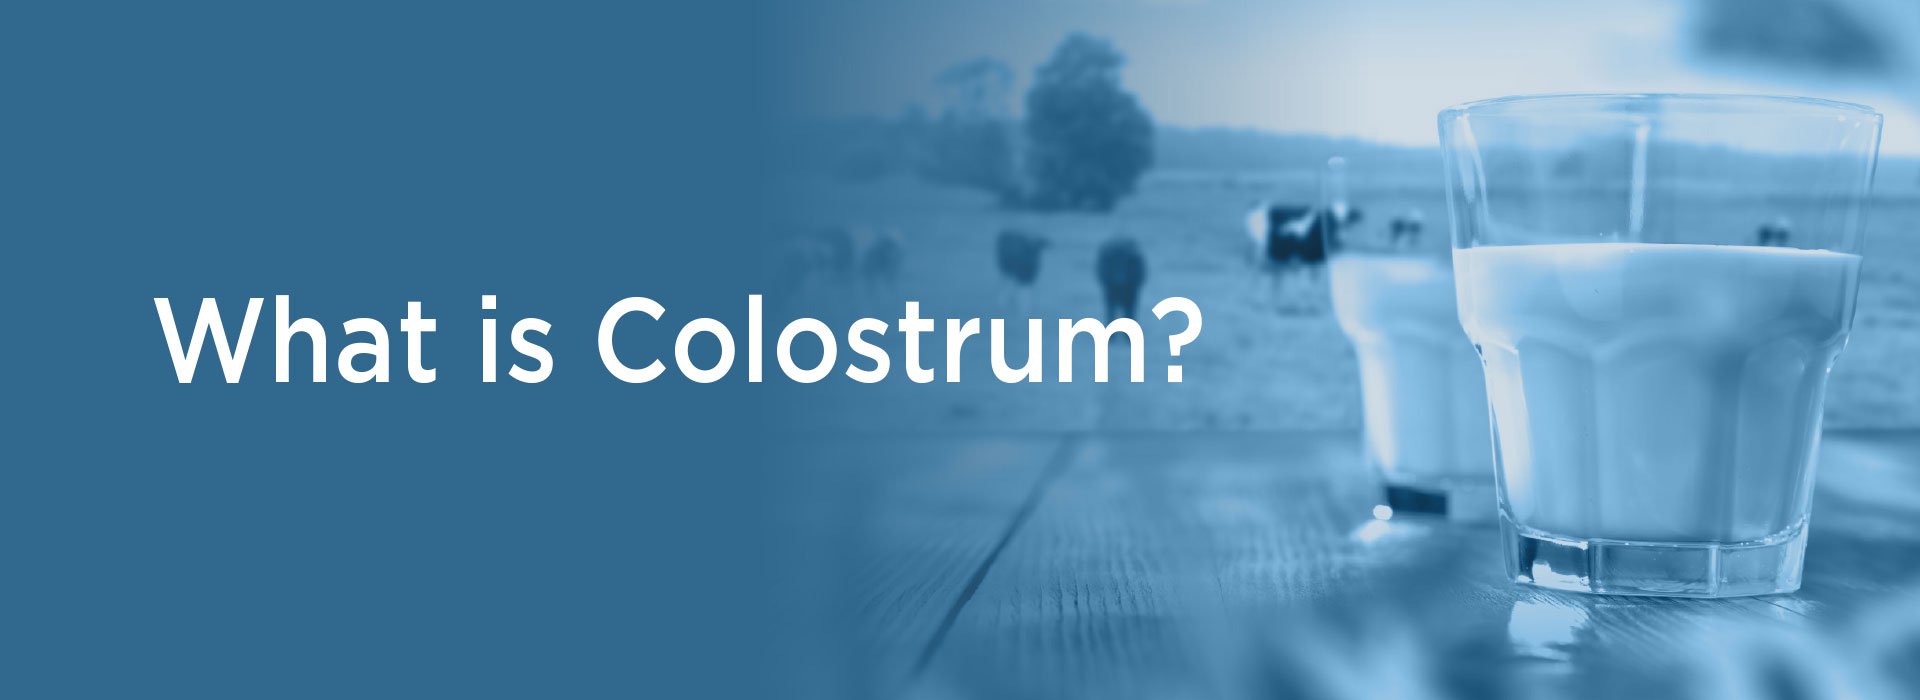 New Image International:What is Colostrum?